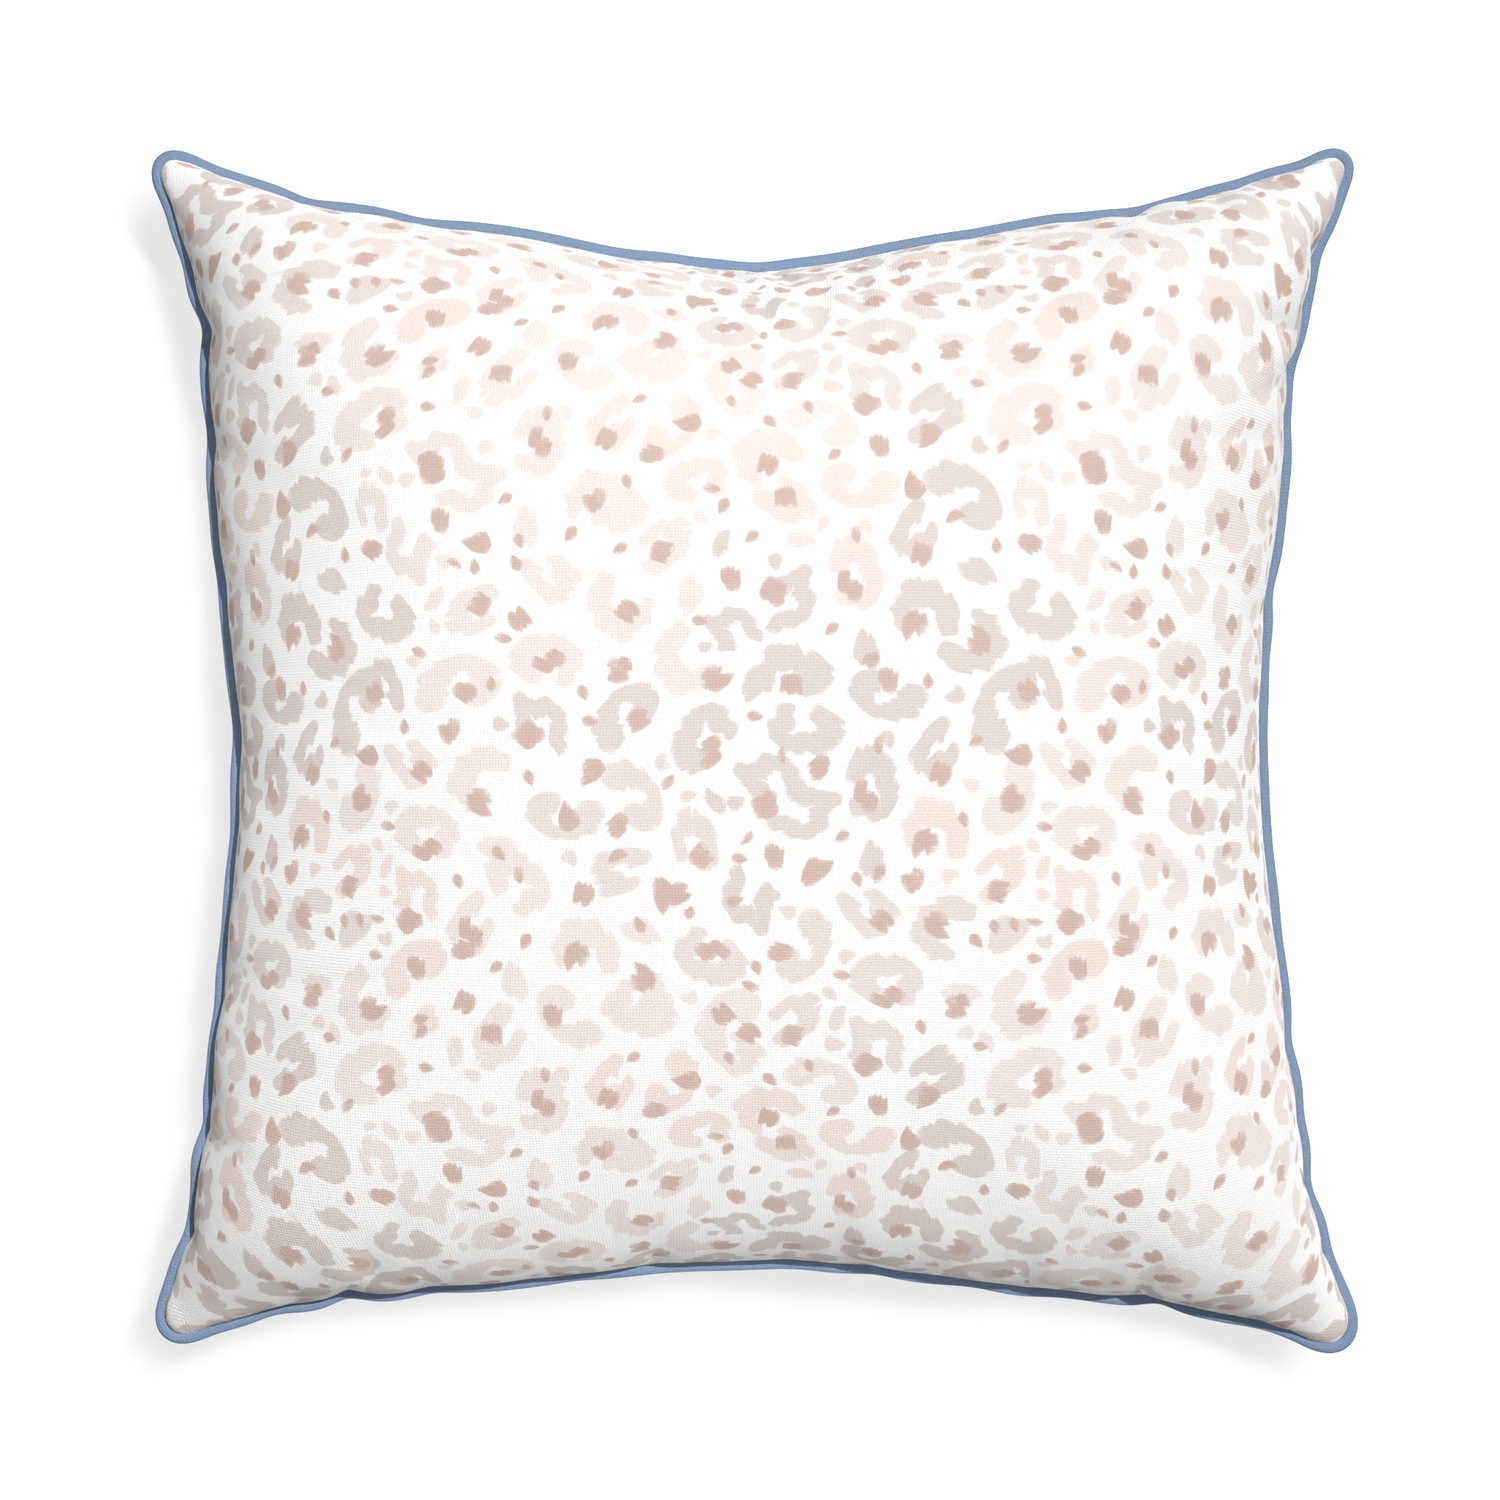 Euro-sham rosie custom pillow with sky piping on white background